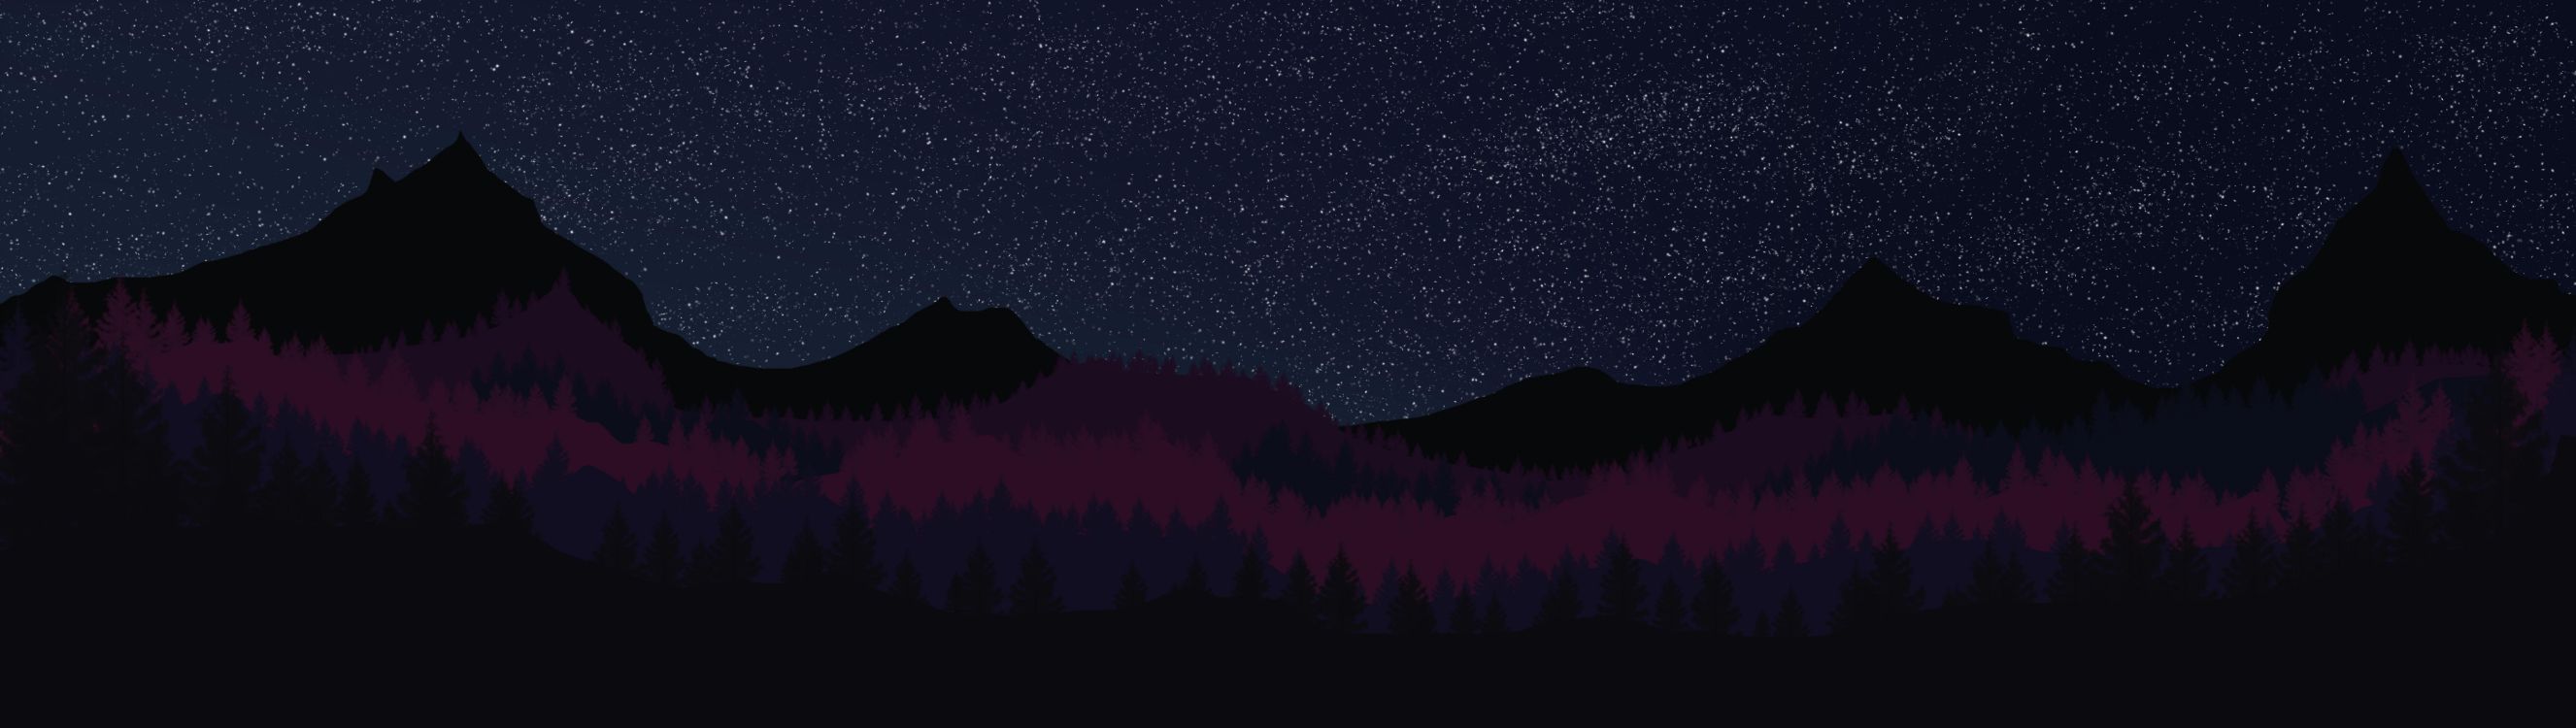 Silhouette of Trees Under Starry Night. Wallpaper in 12000x3392 Resolution